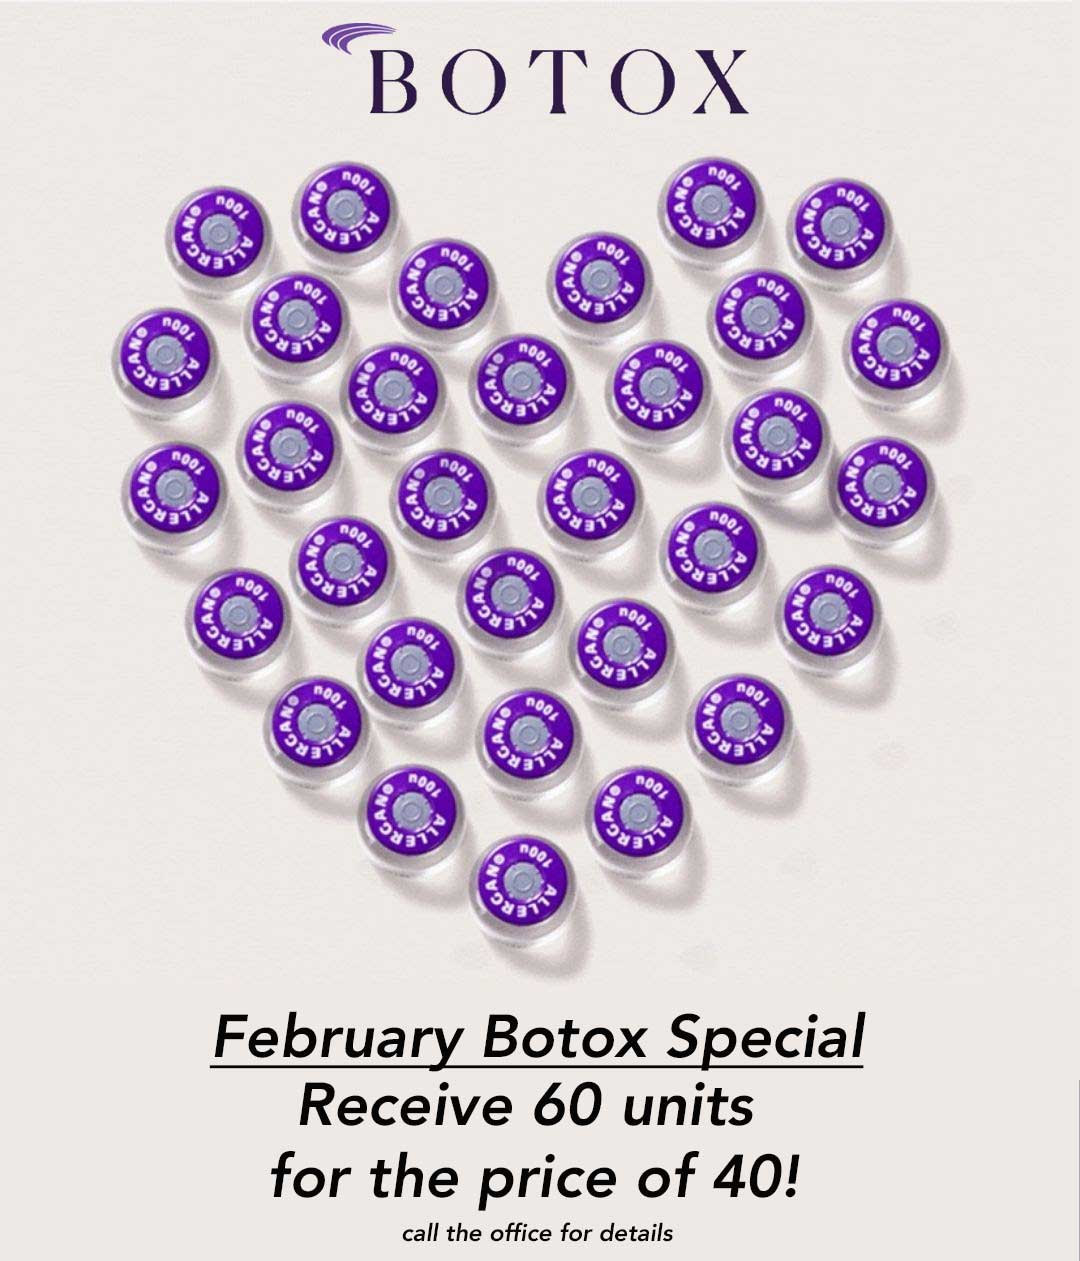 February Botox Special at The Spa Central Coast Paso Robles